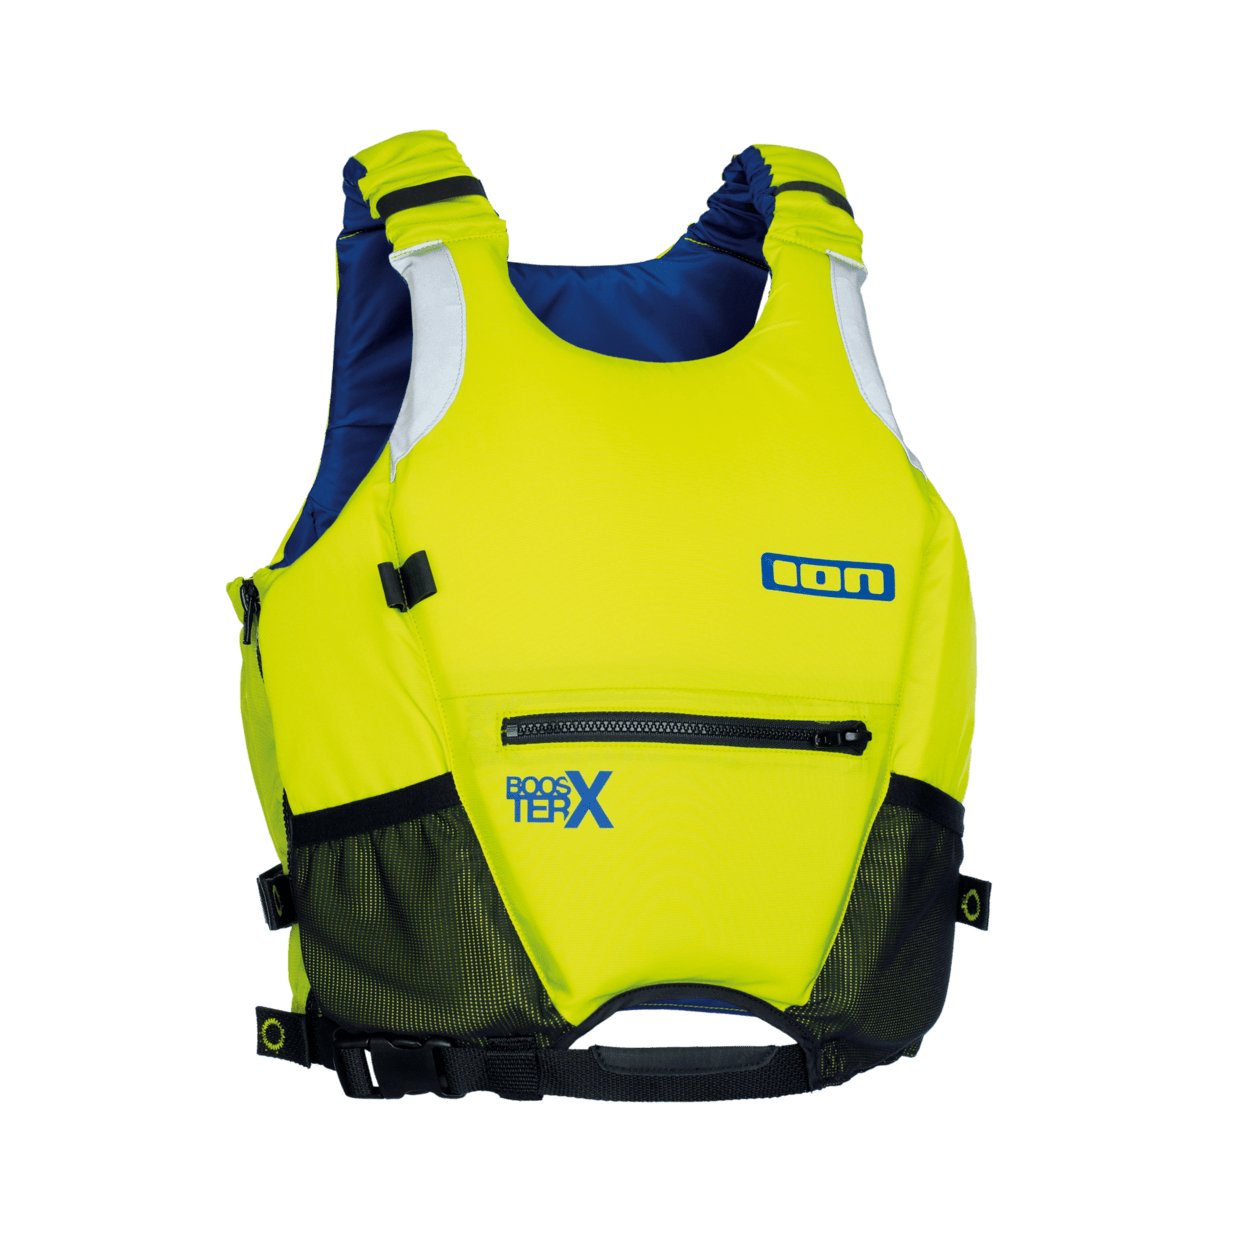 ION Booster X Vest Side Zip 2022 - Worthing Watersports - 9008415982714 - Protection - ION Water